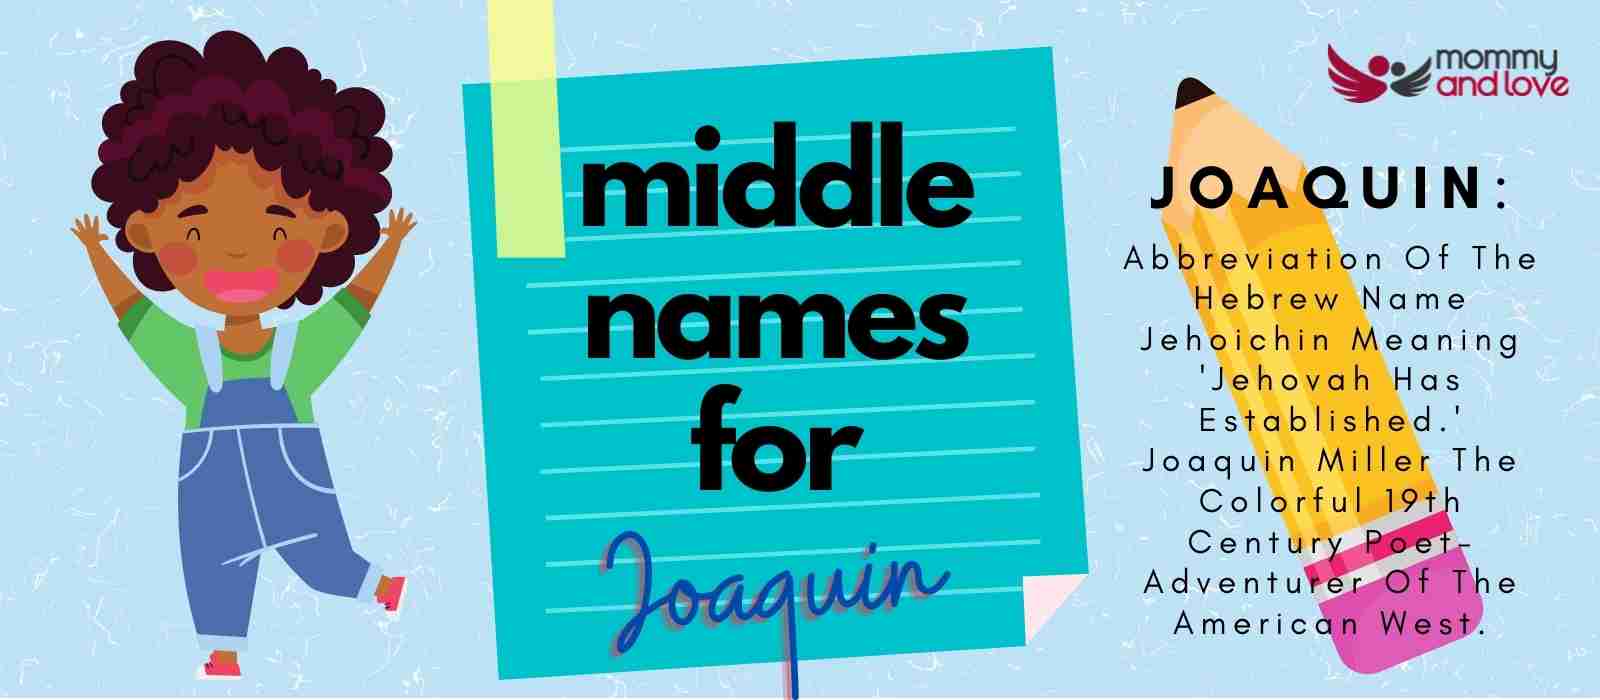 Middle Names for Joaquin